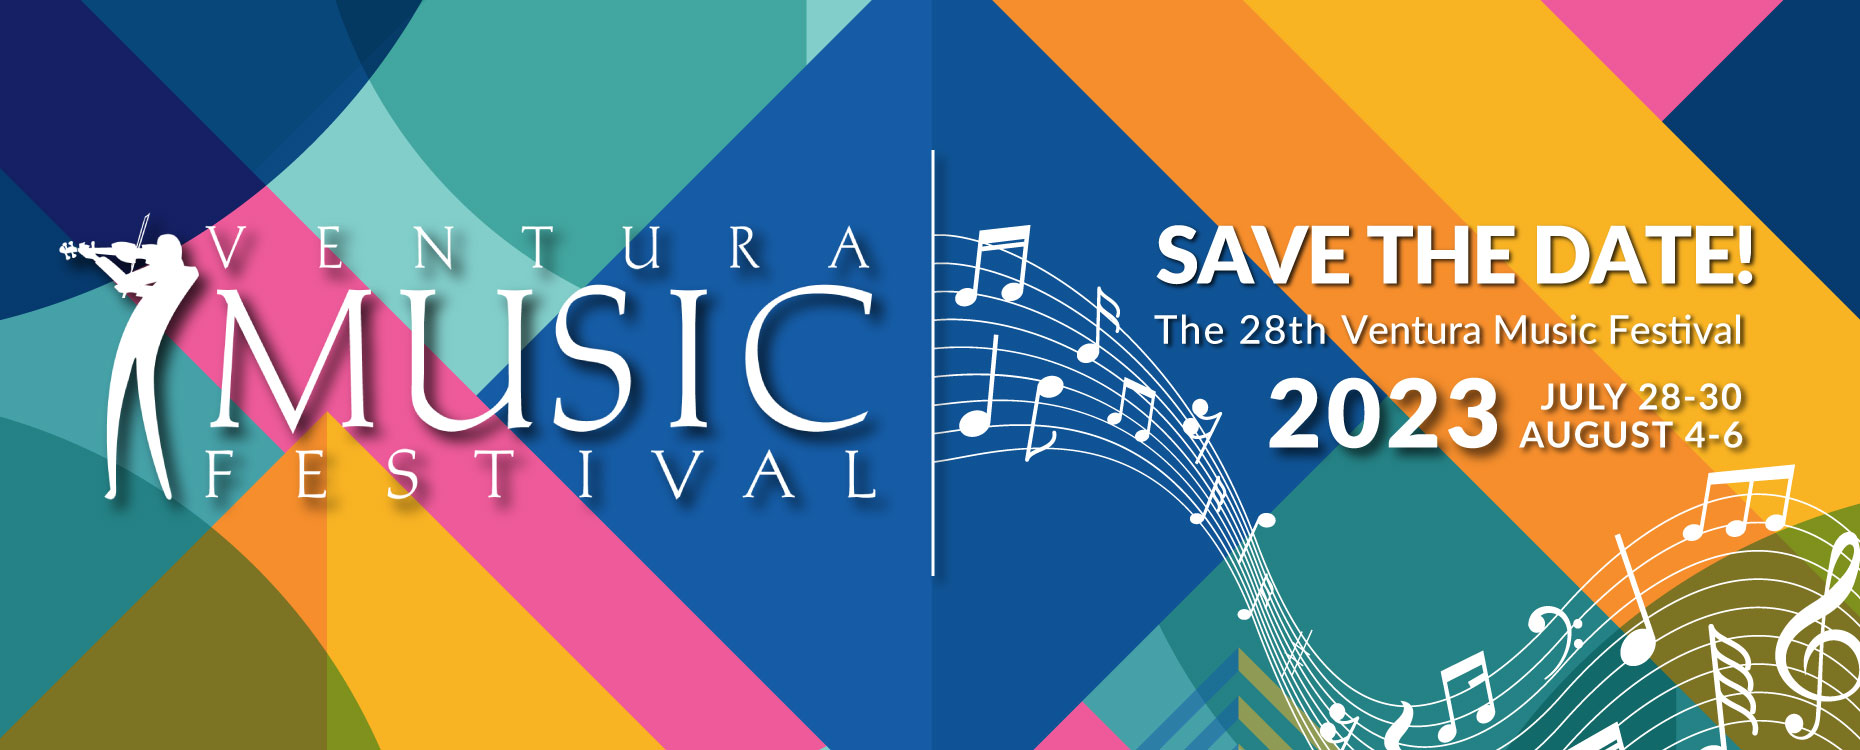 2023 Ventura Music Festival July 28-30 and August 4-6.